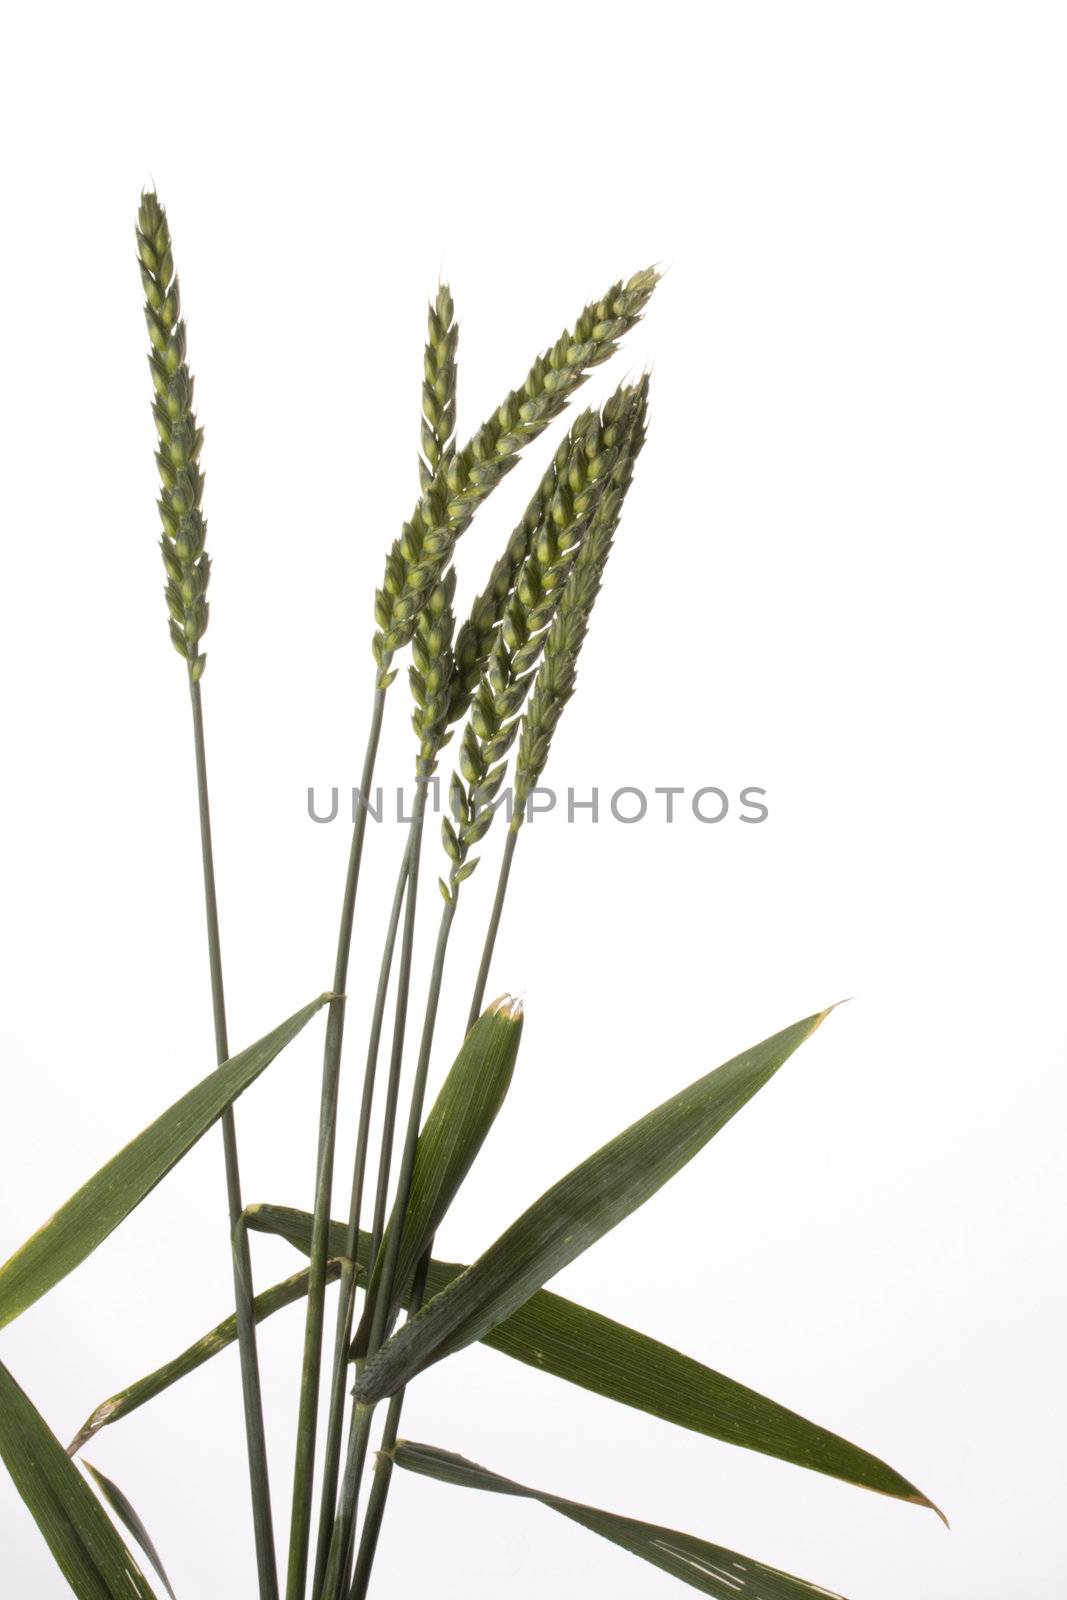 single wheat plants on a white background